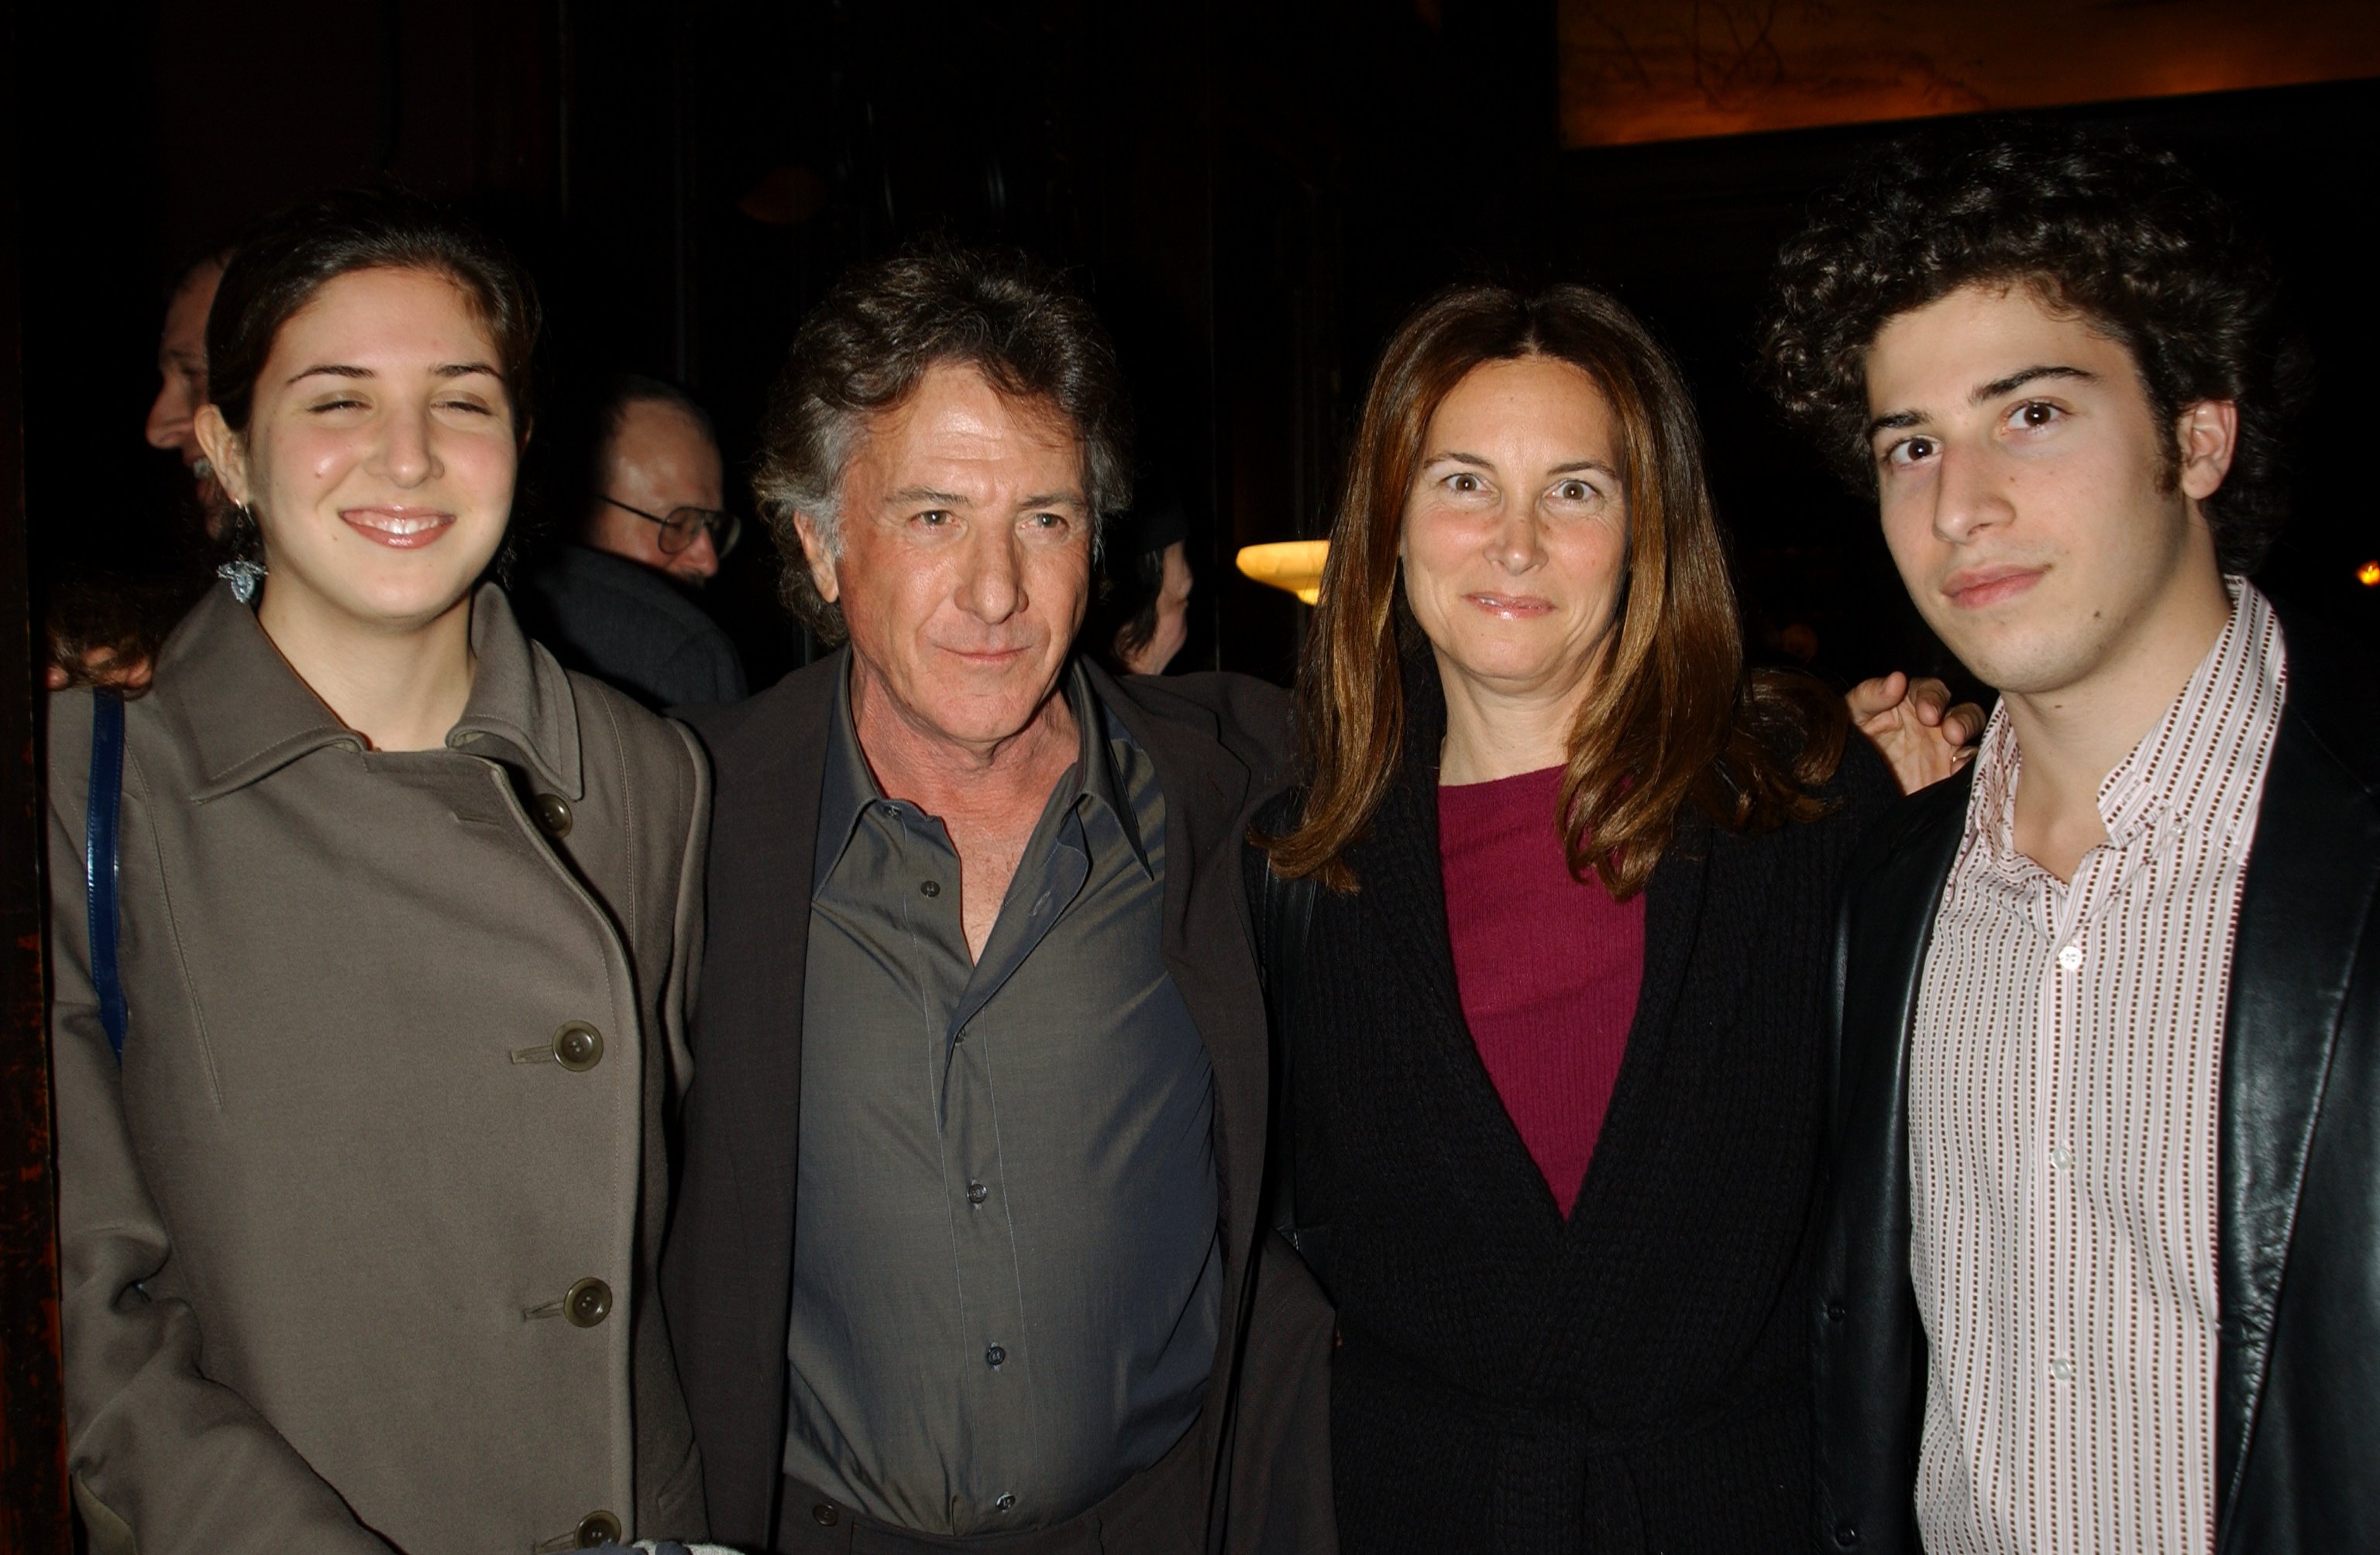 Dustin Hoffman with his daughter, Rebecca, son, Jake, and wife, Lisa, at the Oak Room in the Algonquin Hotel | Photo: Getty Images